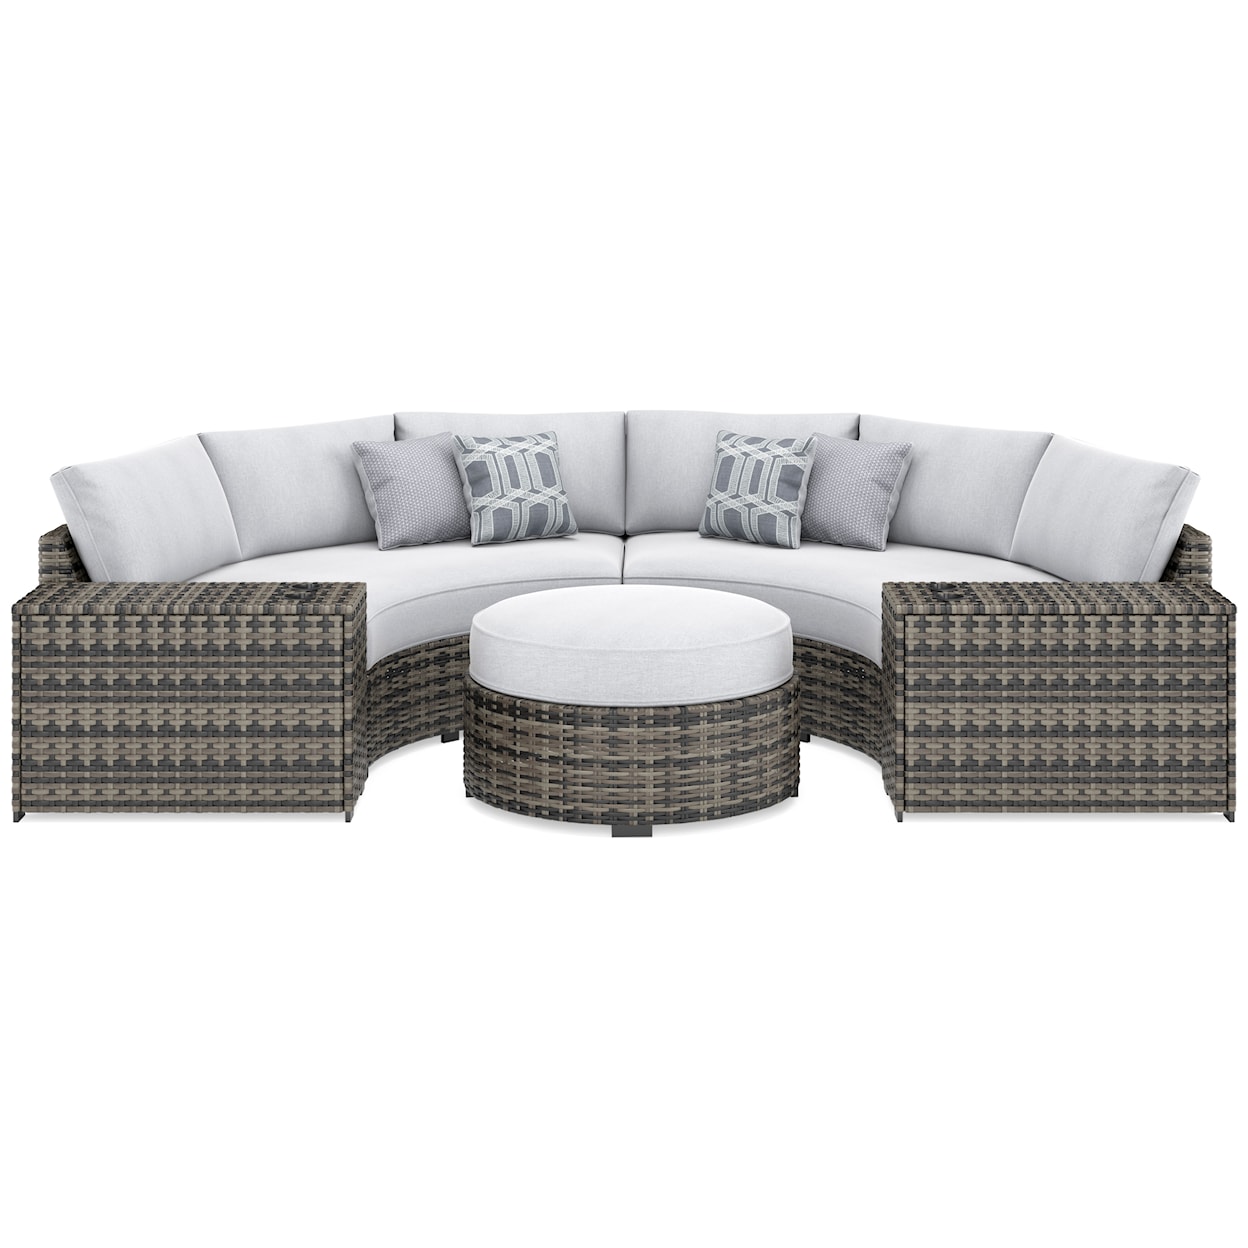 Michael Alan Select Harbor Court 4-Piece Outdoor Sectional